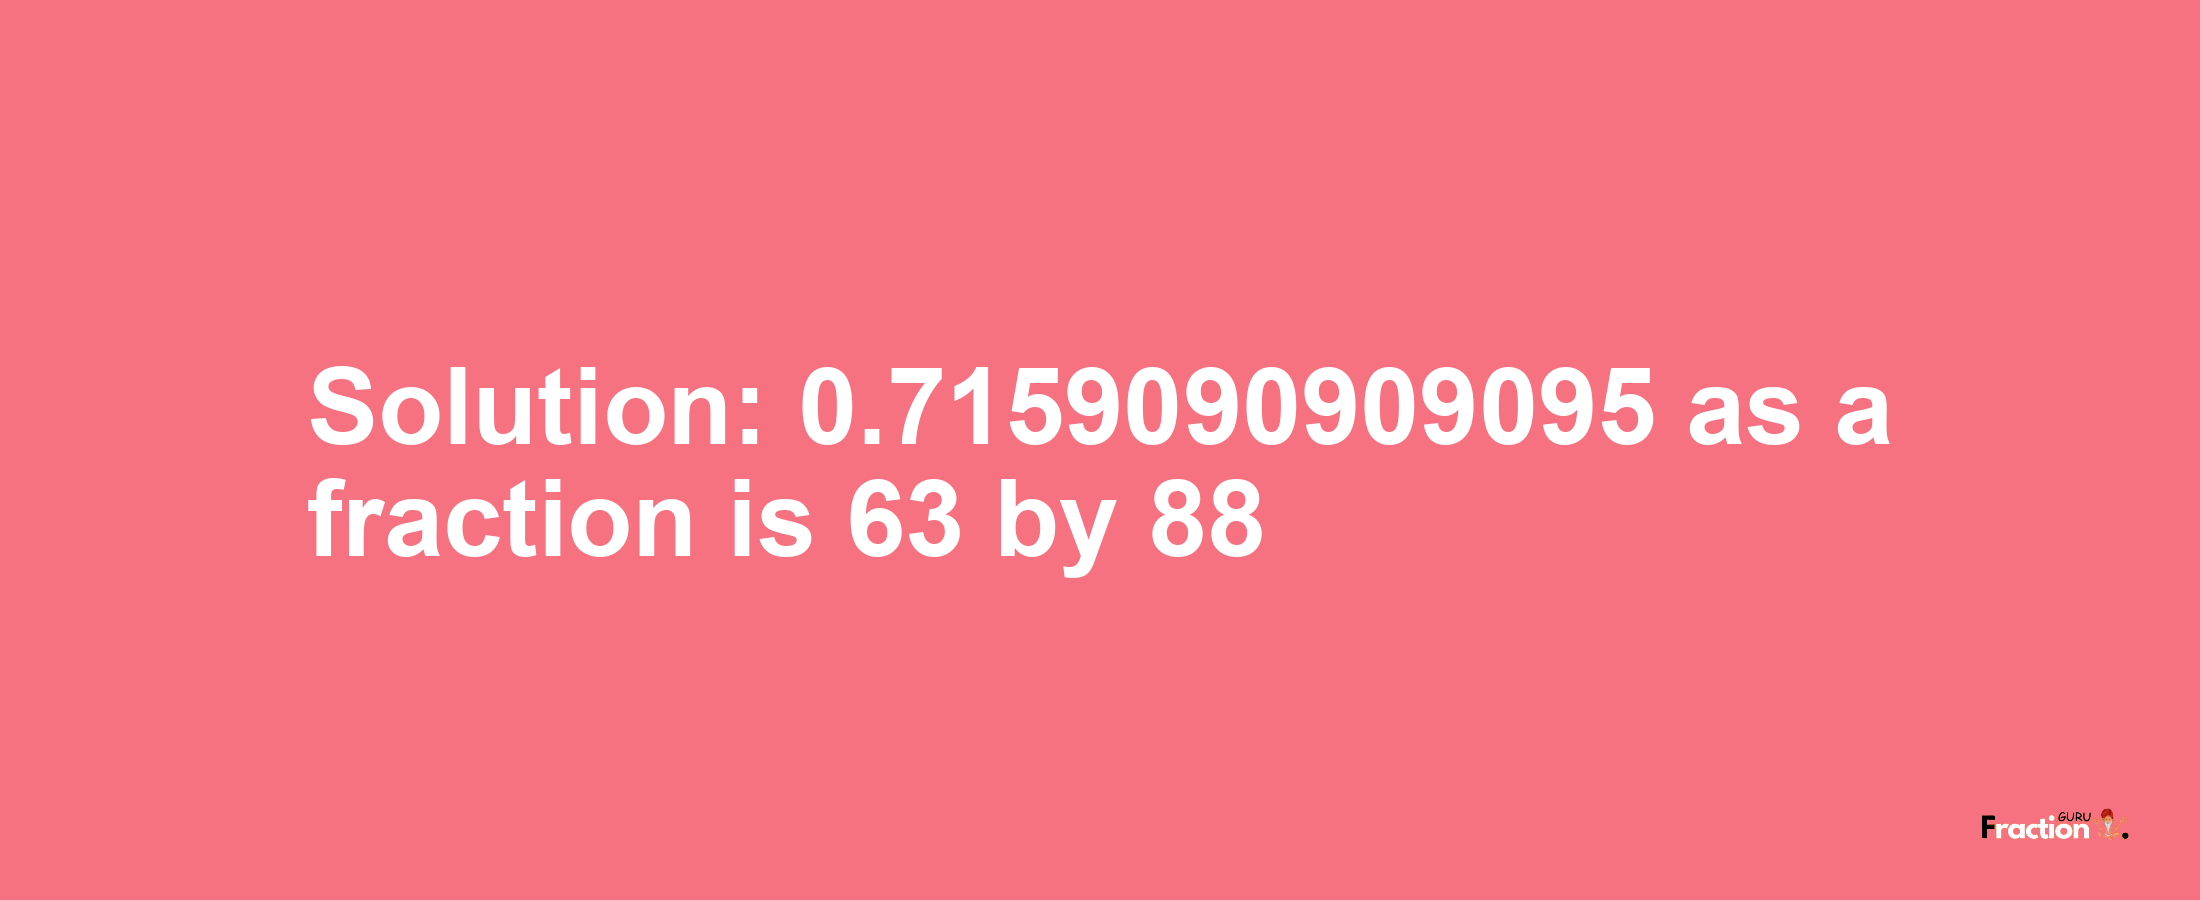 Solution:0.7159090909095 as a fraction is 63/88